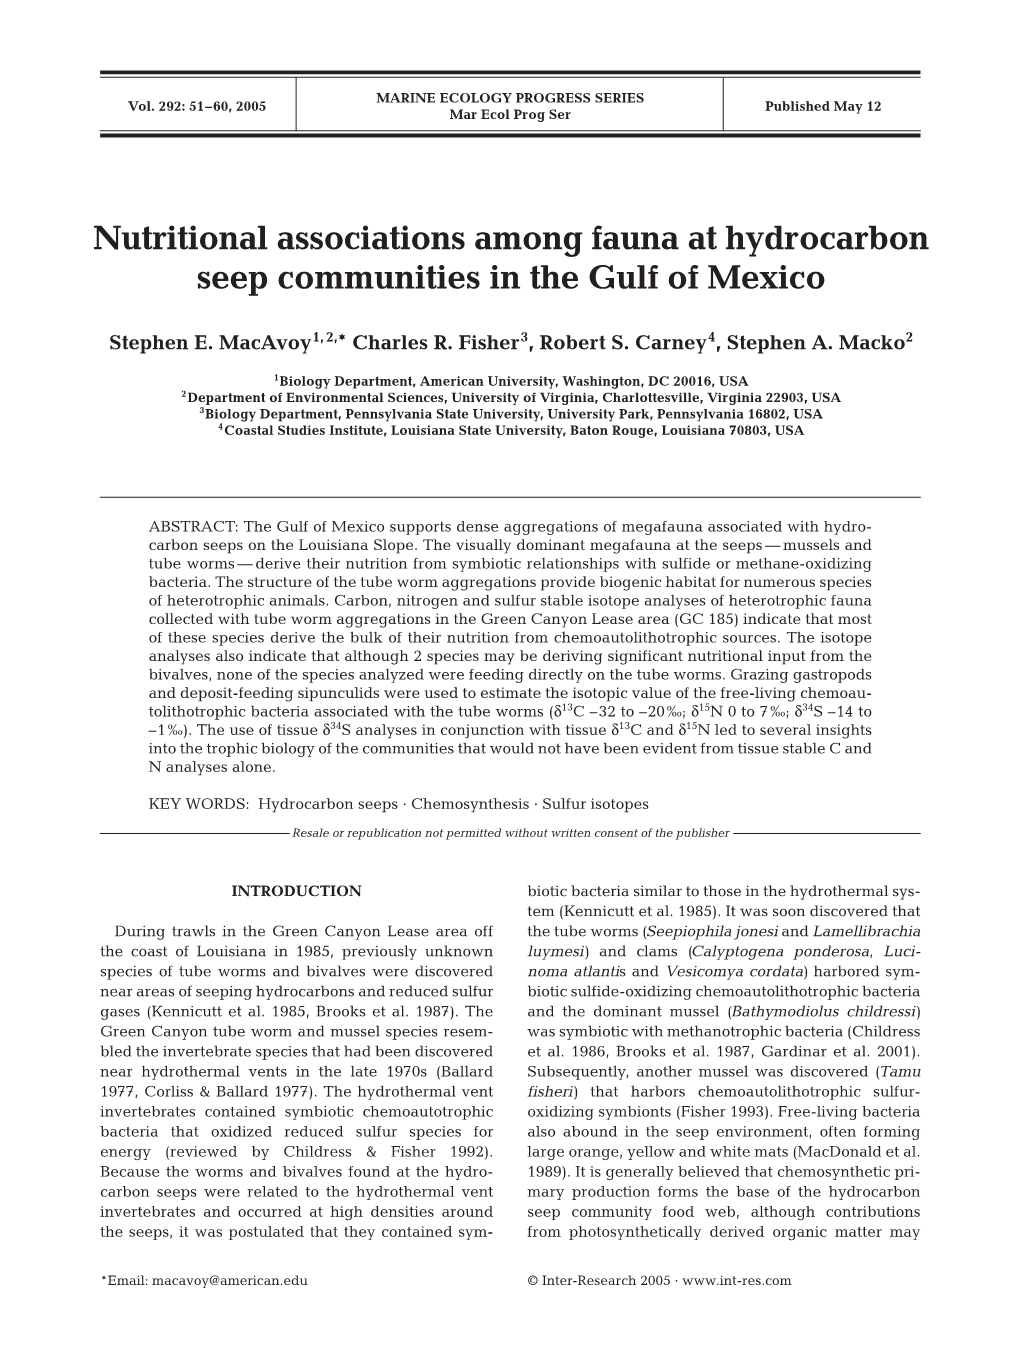 Nutritional Associations Among Fauna at Hydrocarbon Seep Communities in the Gulf of Mexico